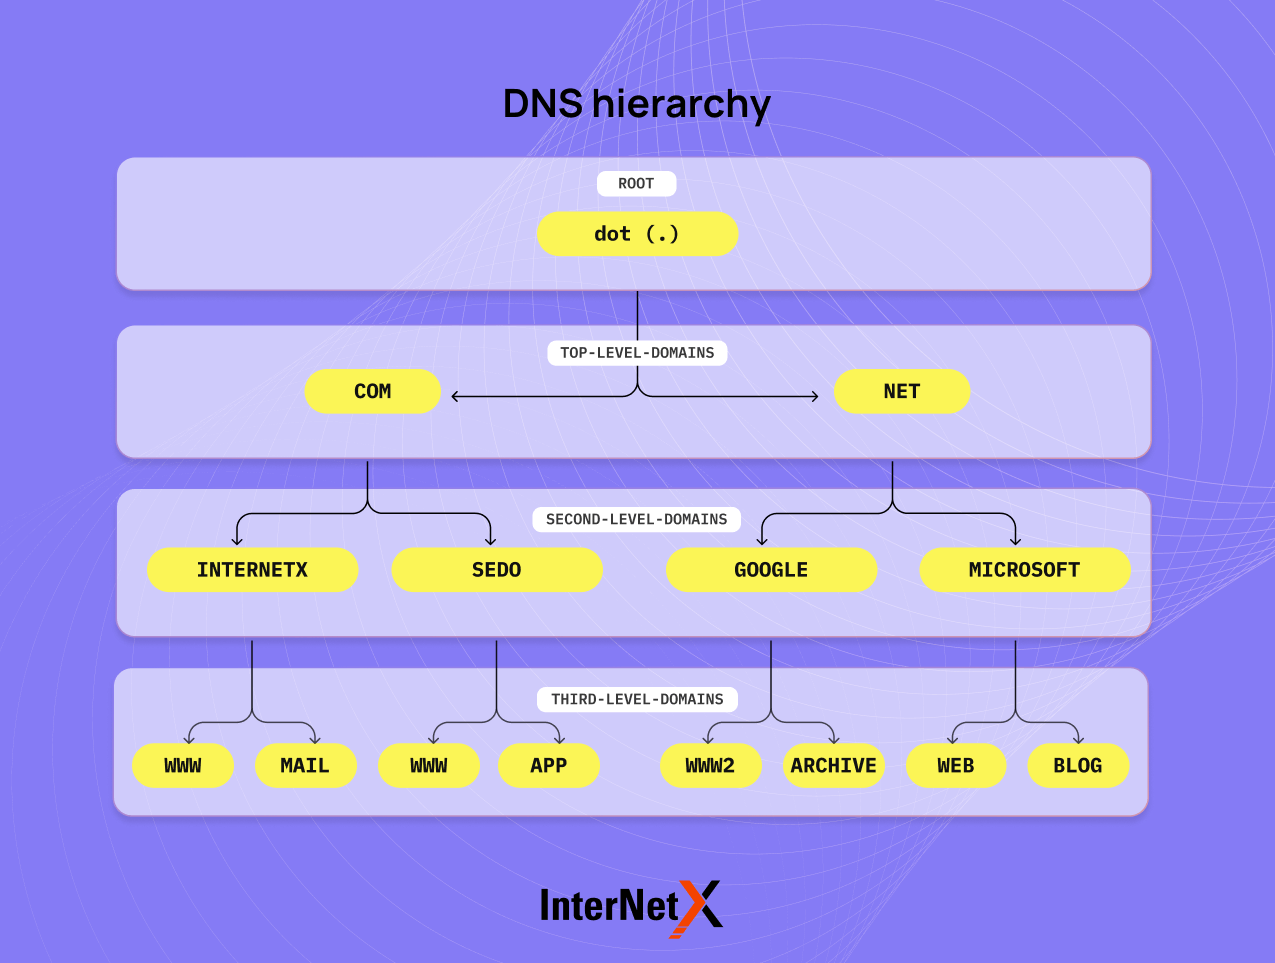 The DNS hierarchy is a structured, multi-level arrangement of domain names that follow a top-down approach for resolving human-readable domain names to IP addresses. It consists of elements like root servers, top-level domains (TLDs), second-level domains, and subdomains, which help in organizing and managing domain name allocations efficiently.